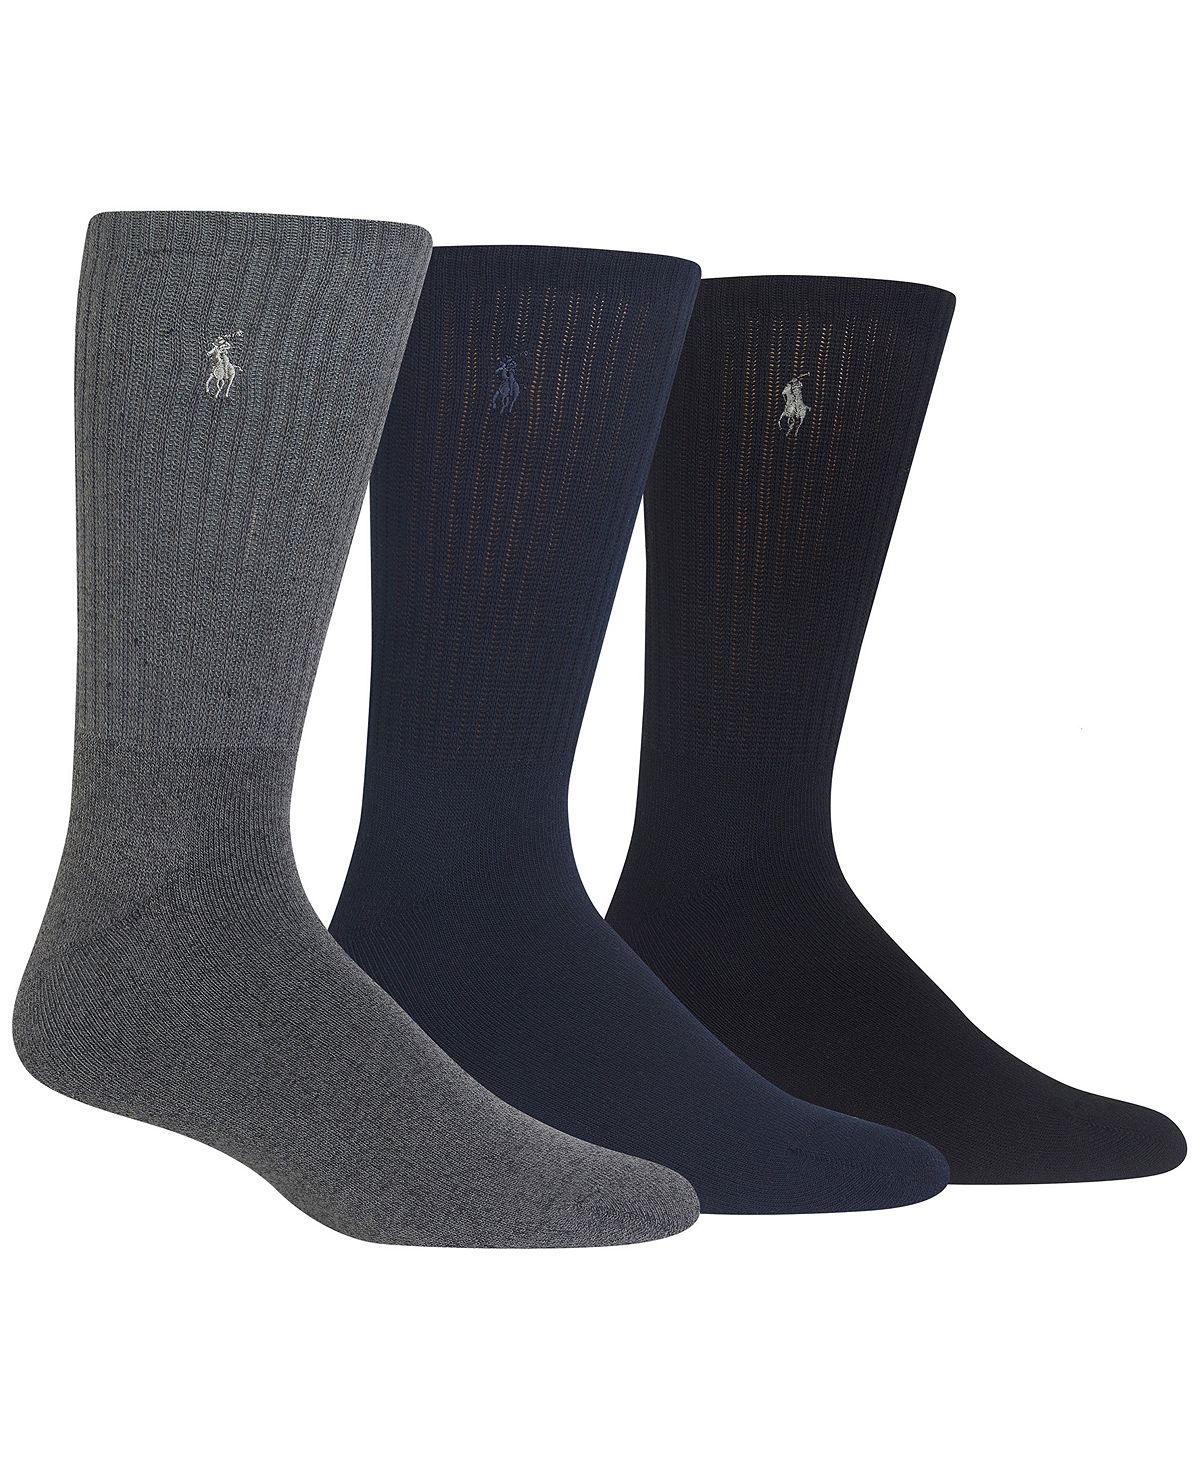 Polo Ralph Lauren 3-pk. Twisted Crew Casual Socks Assorted